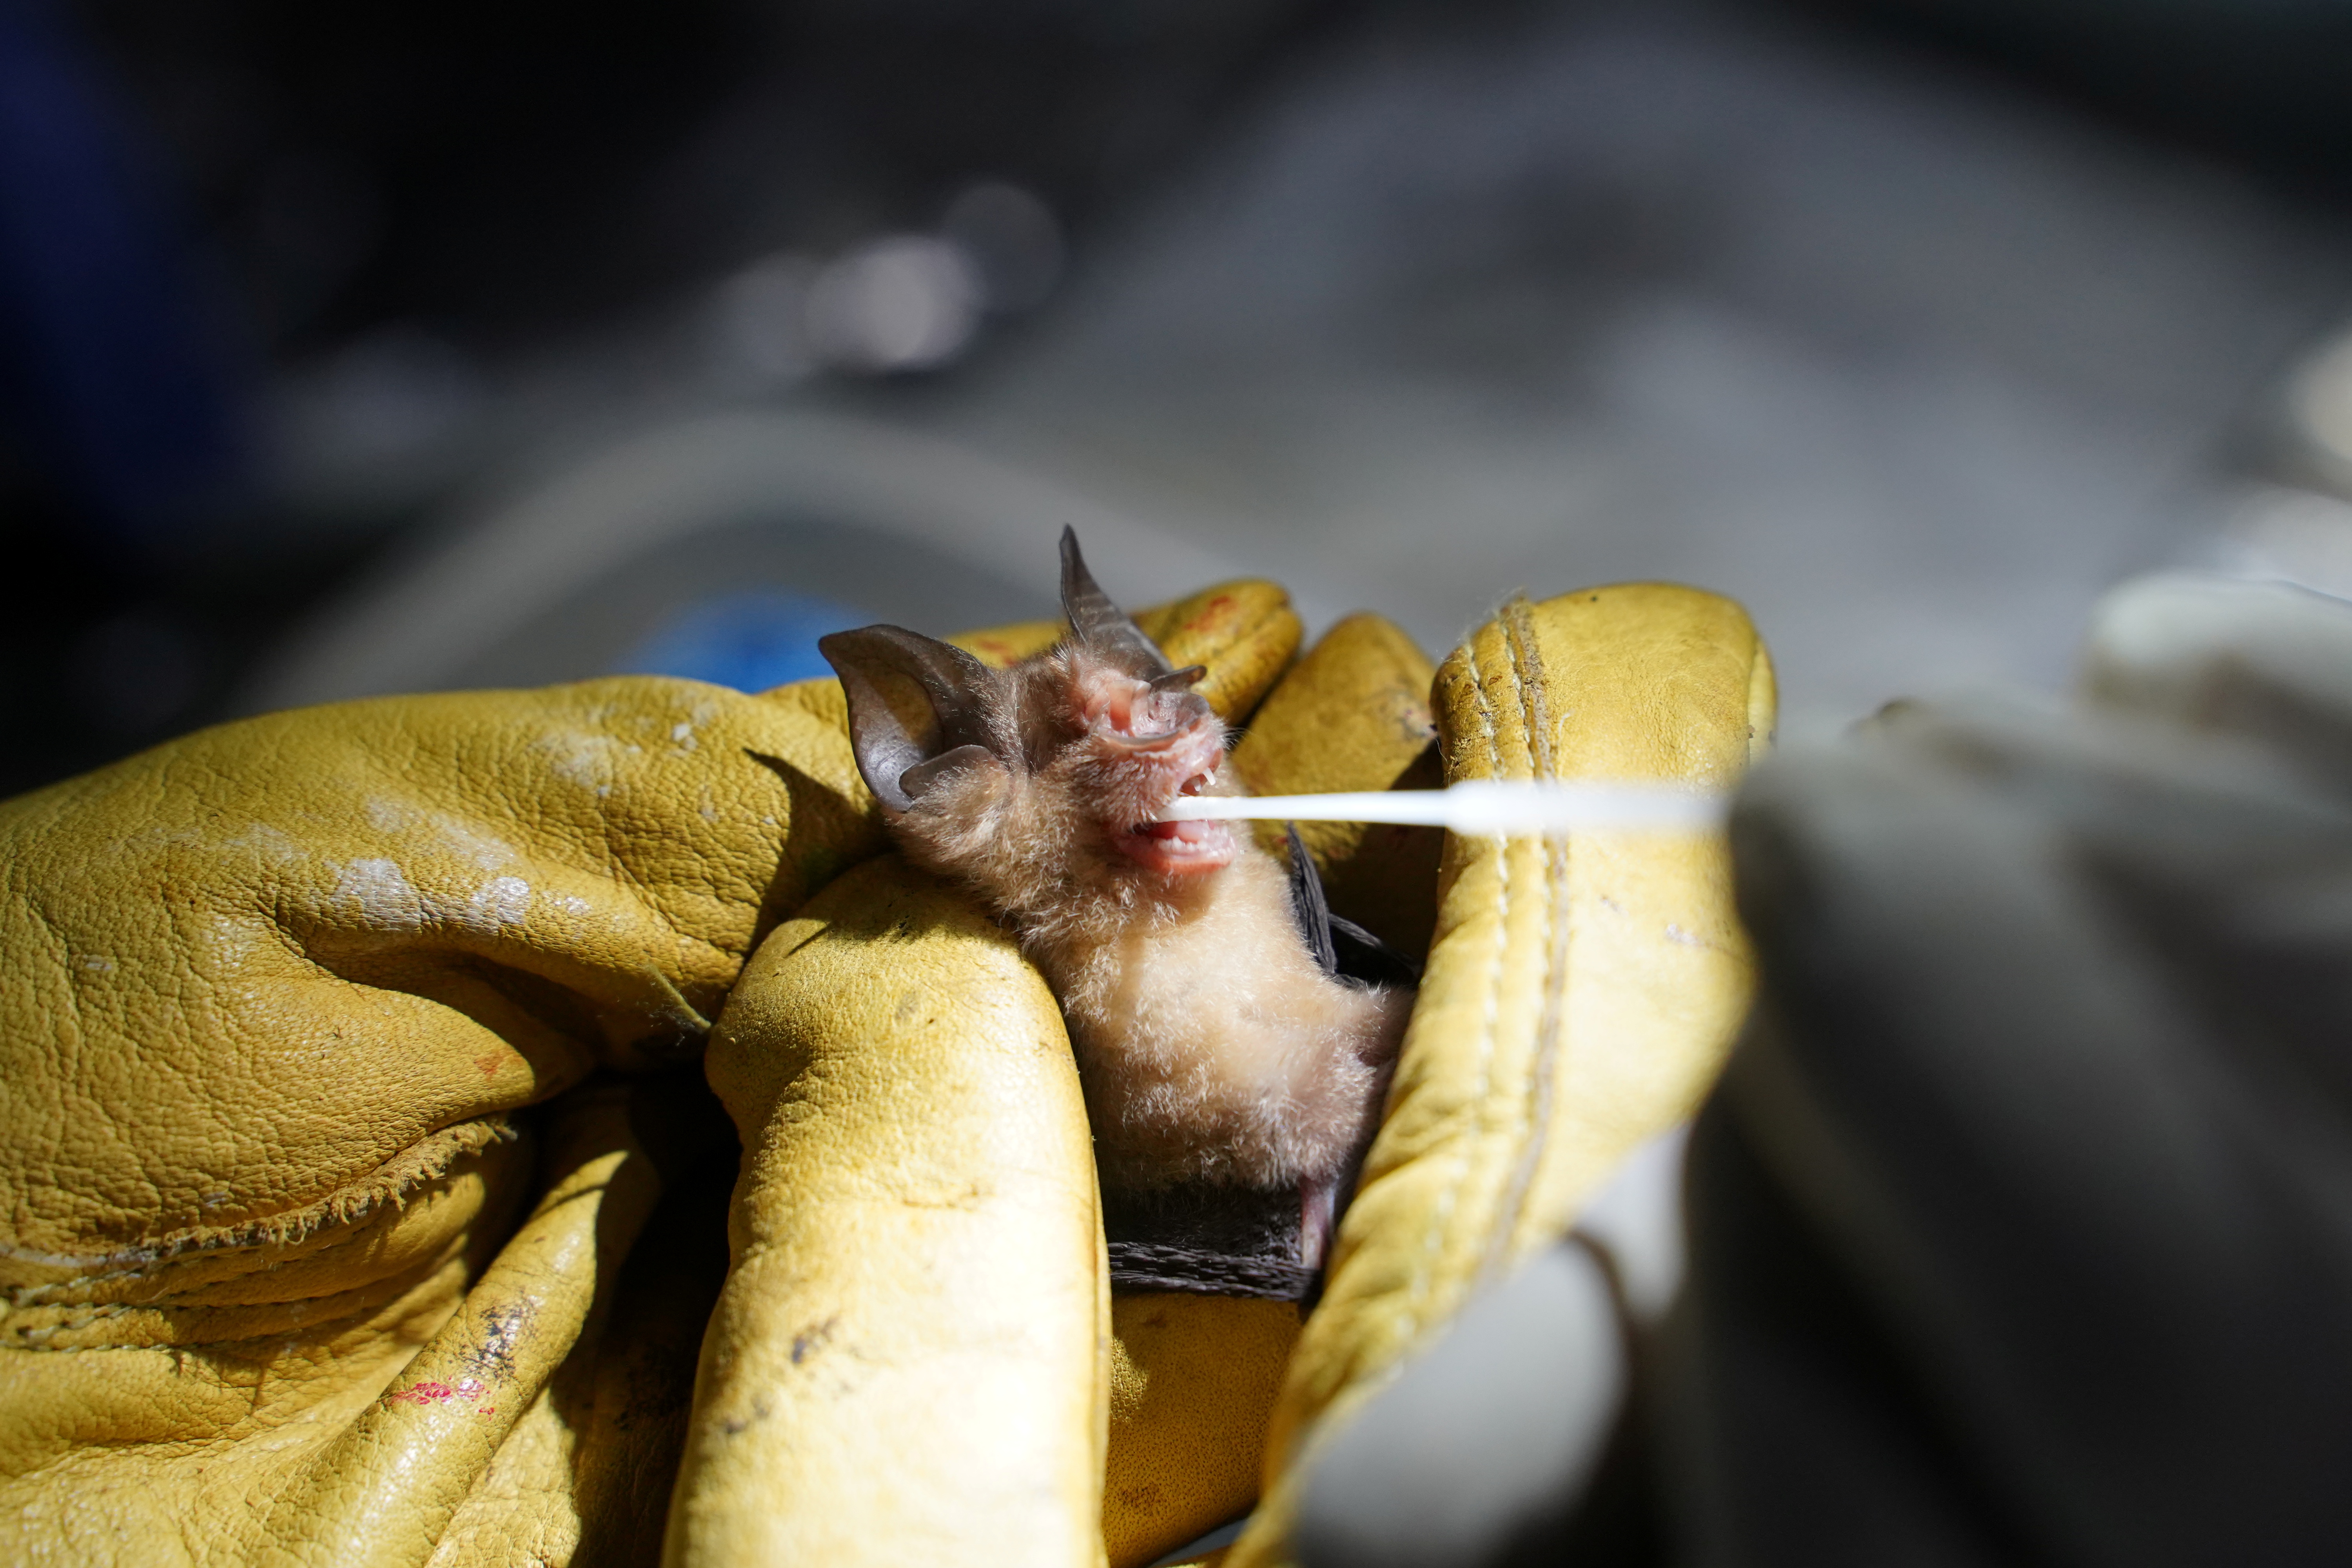 Institut Pasteur du Cambodge researchers collect samples from bats captured at Chhngauk Hill